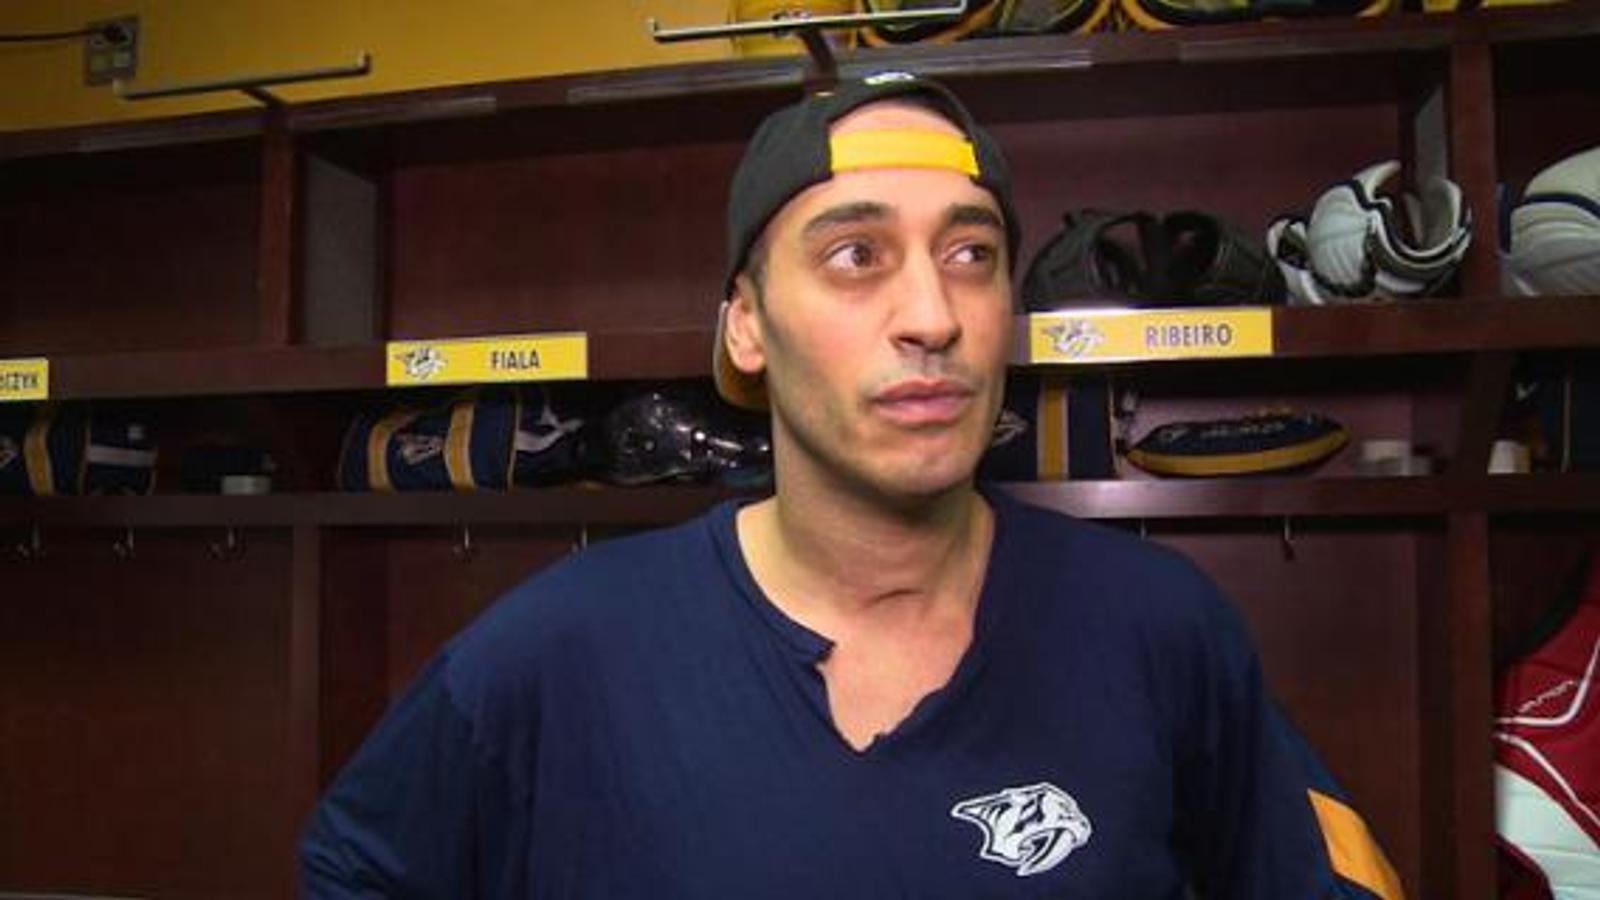 Another bad news for Mike Ribeiro…